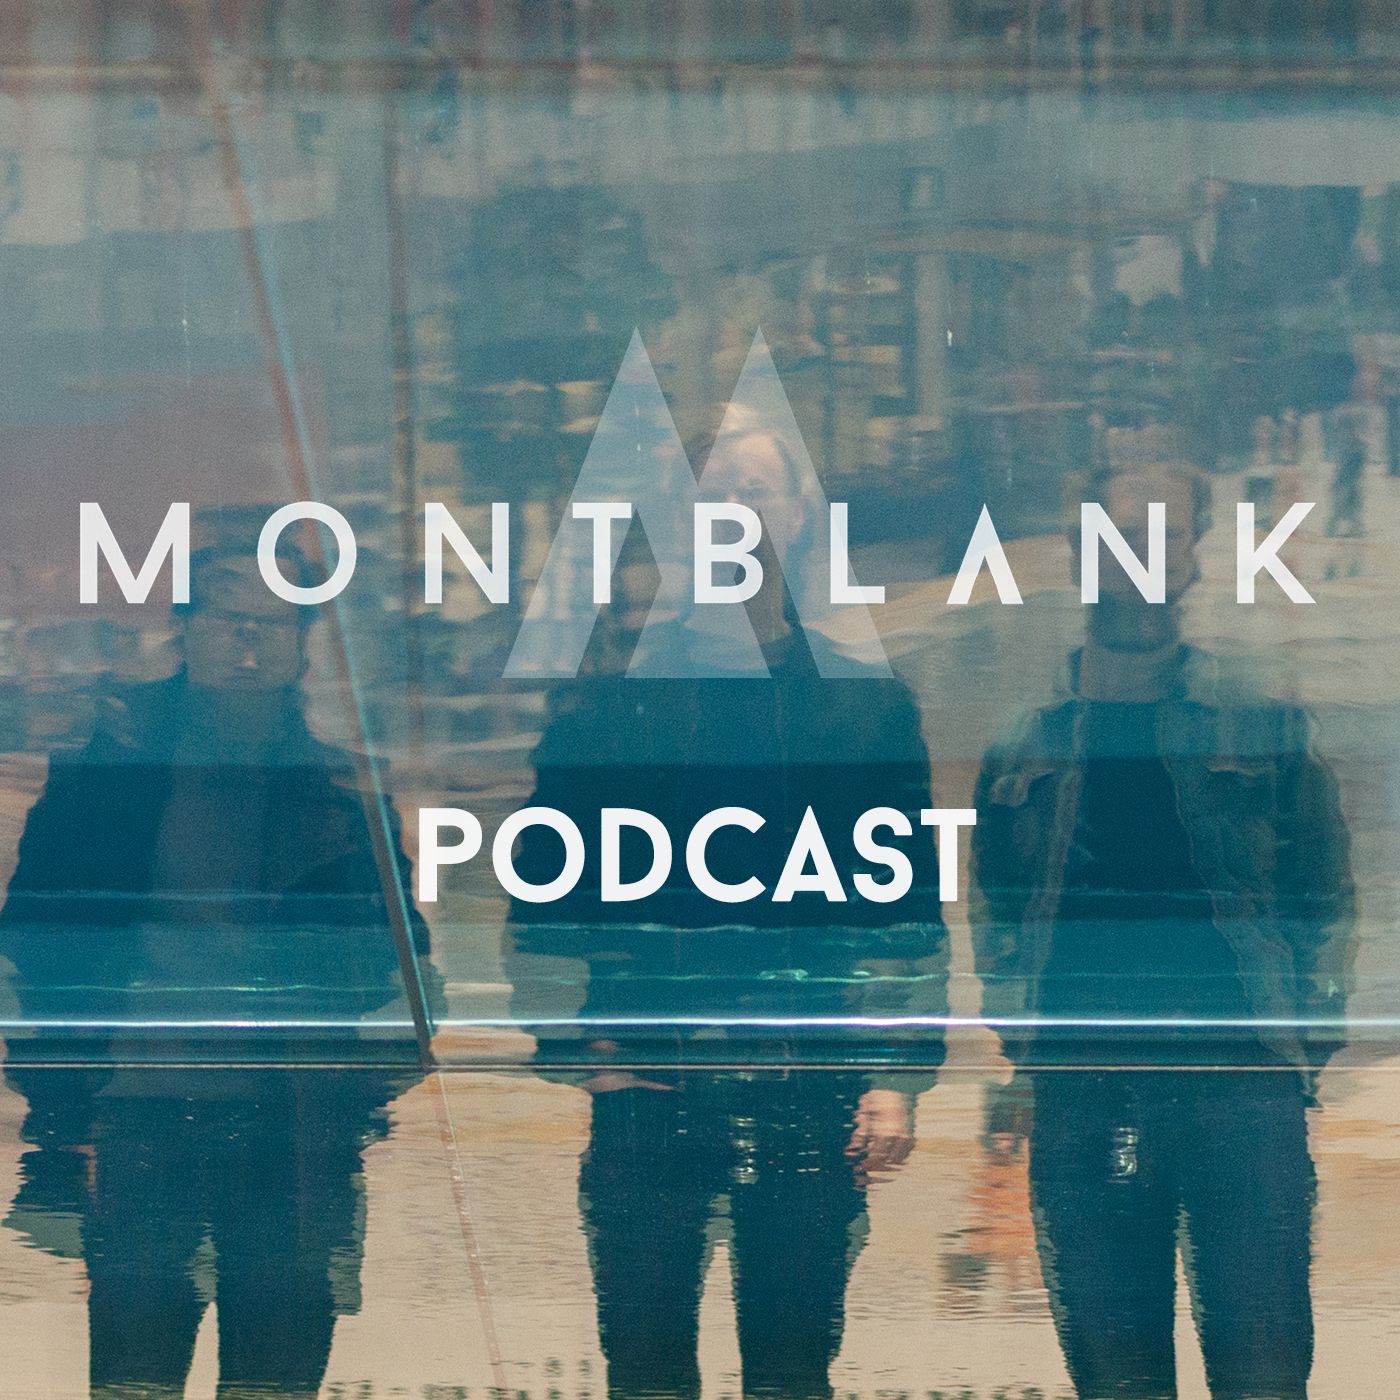 MONTBLANK Podcast